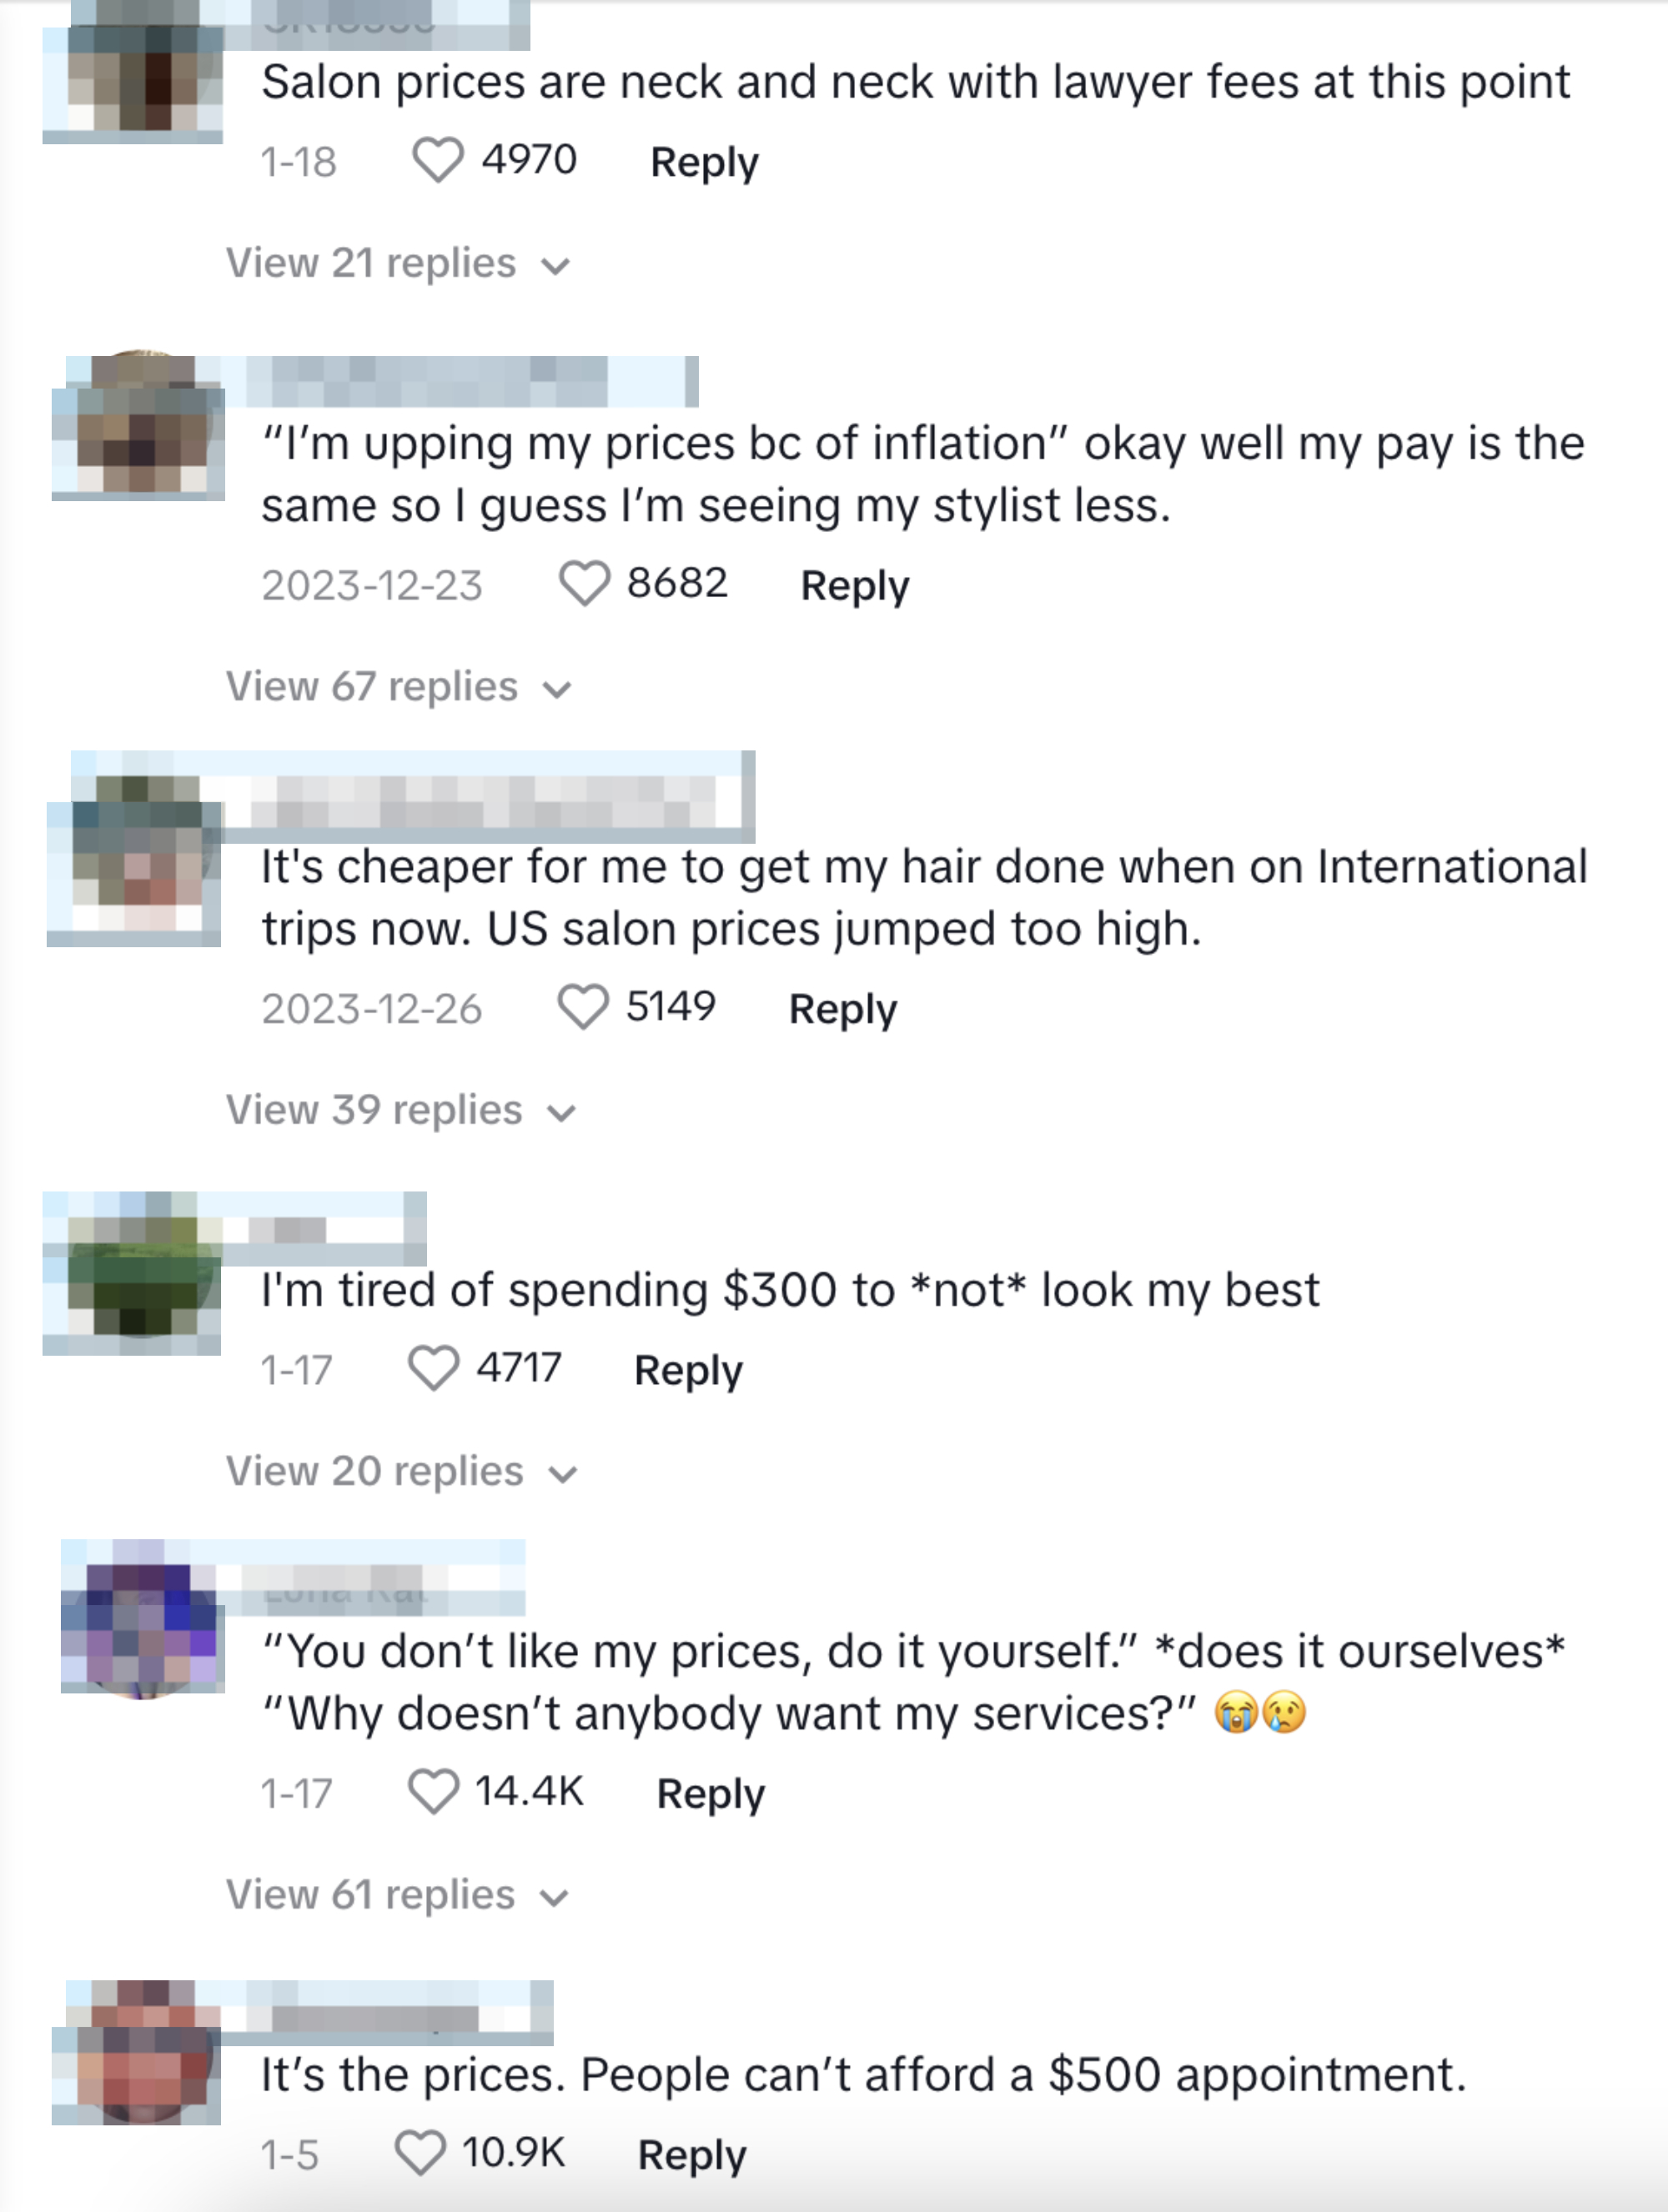 Comment section of a social media post with various users discussing salon prices, personal styles, and making humorous remarks